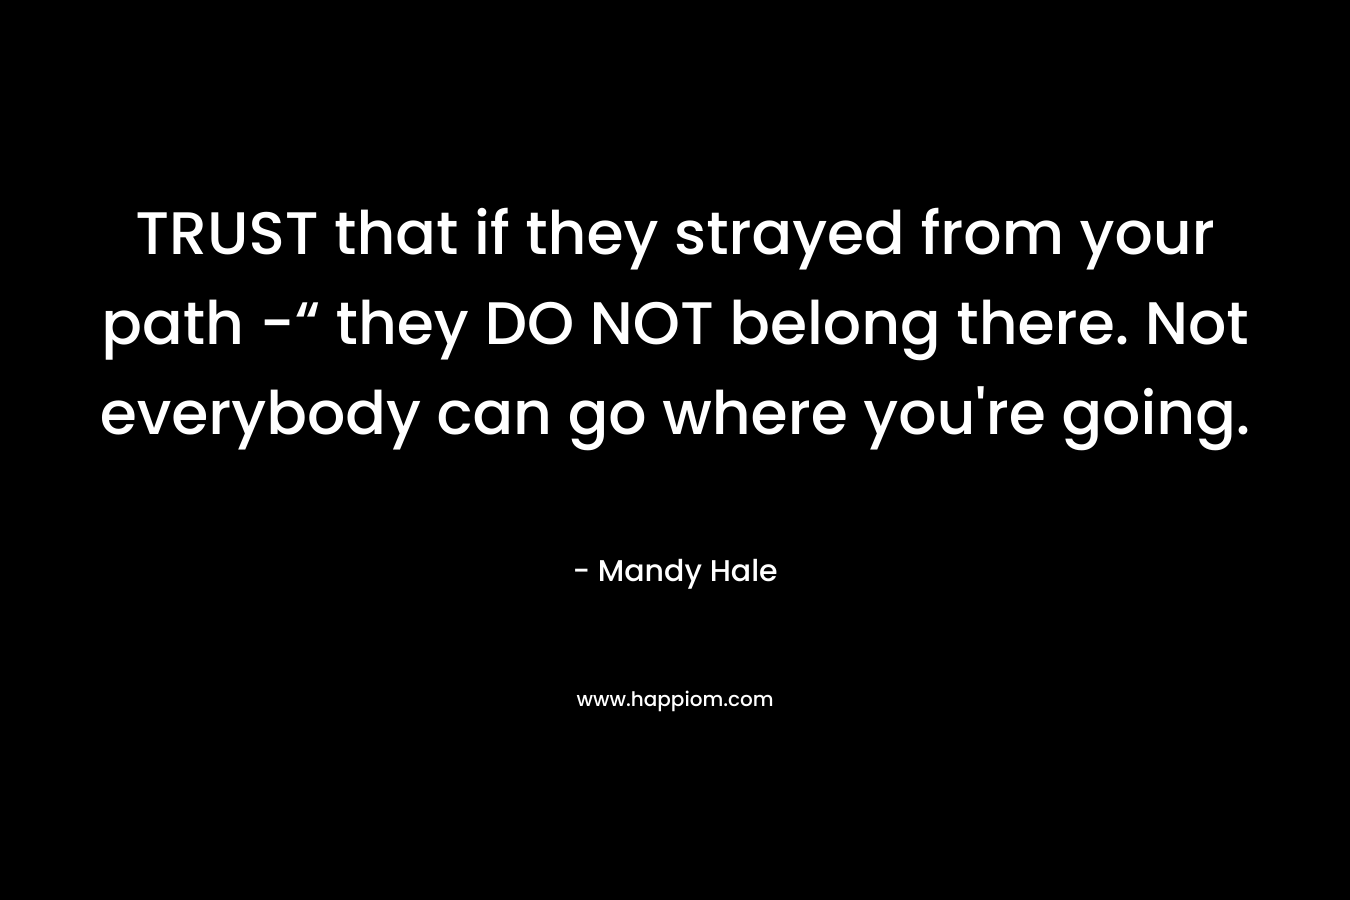 TRUST that if they strayed from your path -“ they DO NOT belong there. Not everybody can go where you’re going. – Mandy Hale